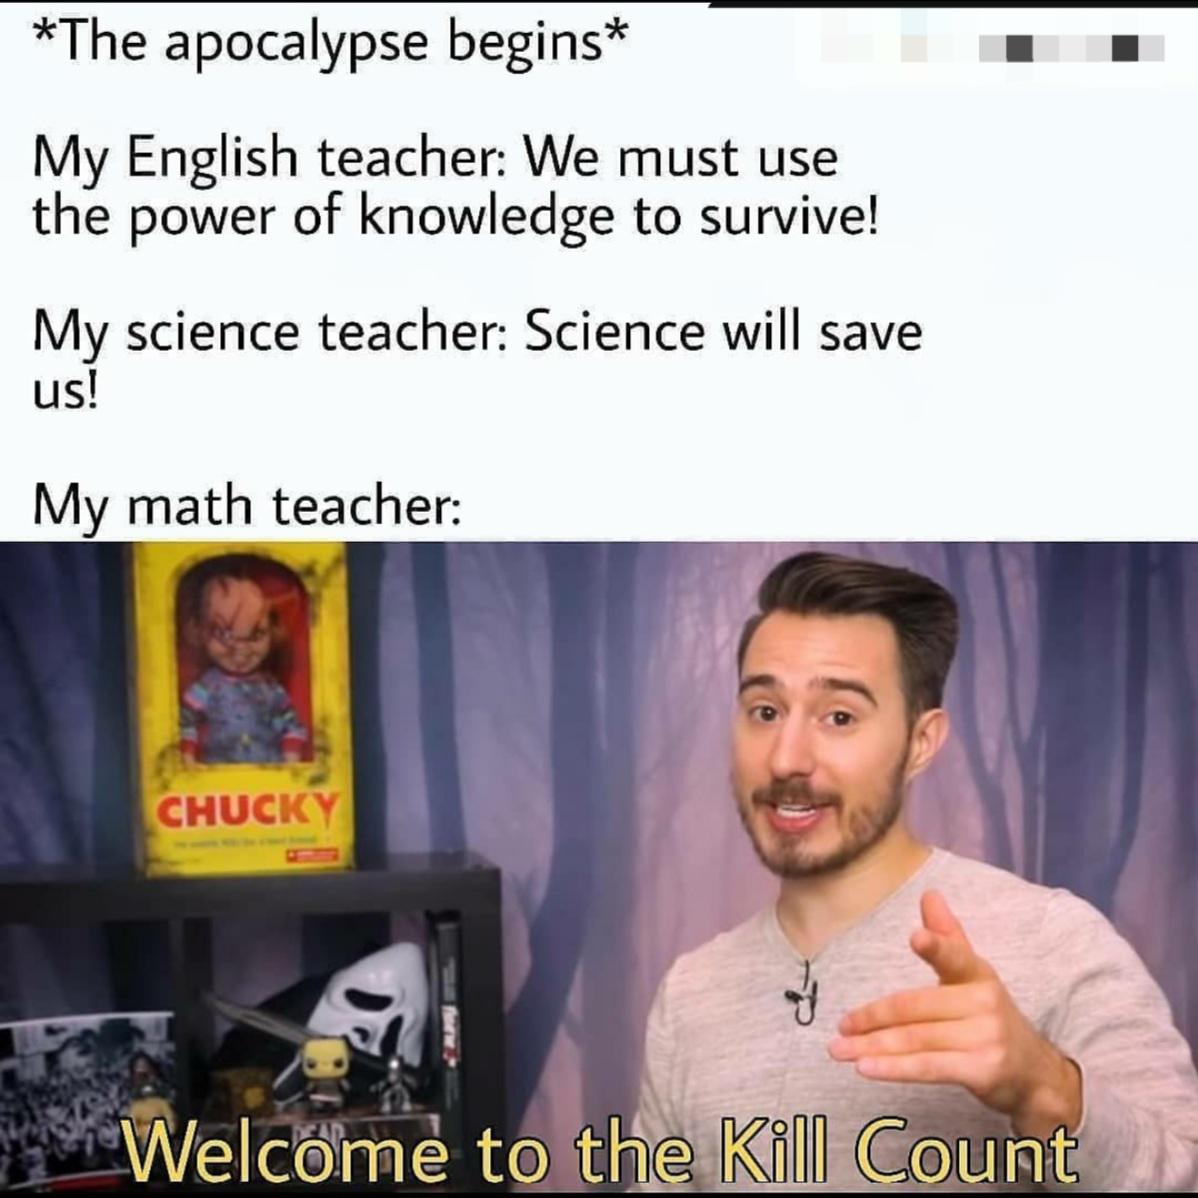 r cringetopia - The apocalypse begins My English teacher We must use the power of knowledge to survive! My science teacher Science will save us! My math teacher Chucky Welcome to the Kill Count